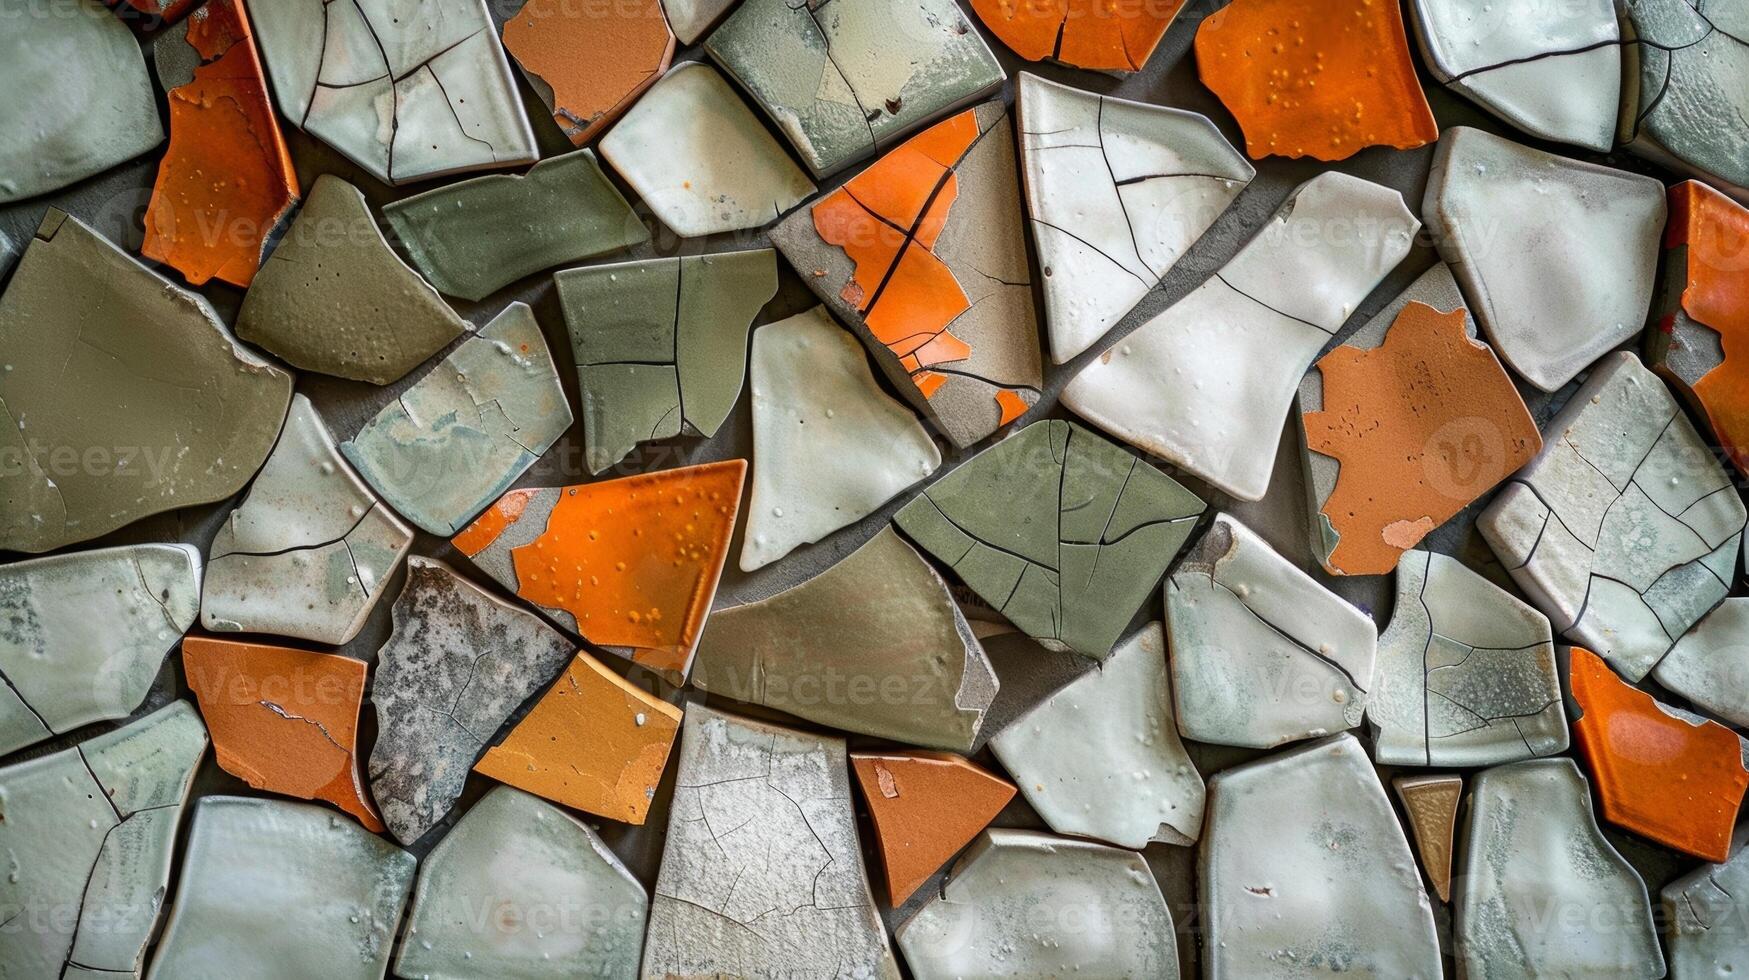 A mosaicstyle ceramic wall installation using broken pieces of pottery to create a unique and textured design. photo